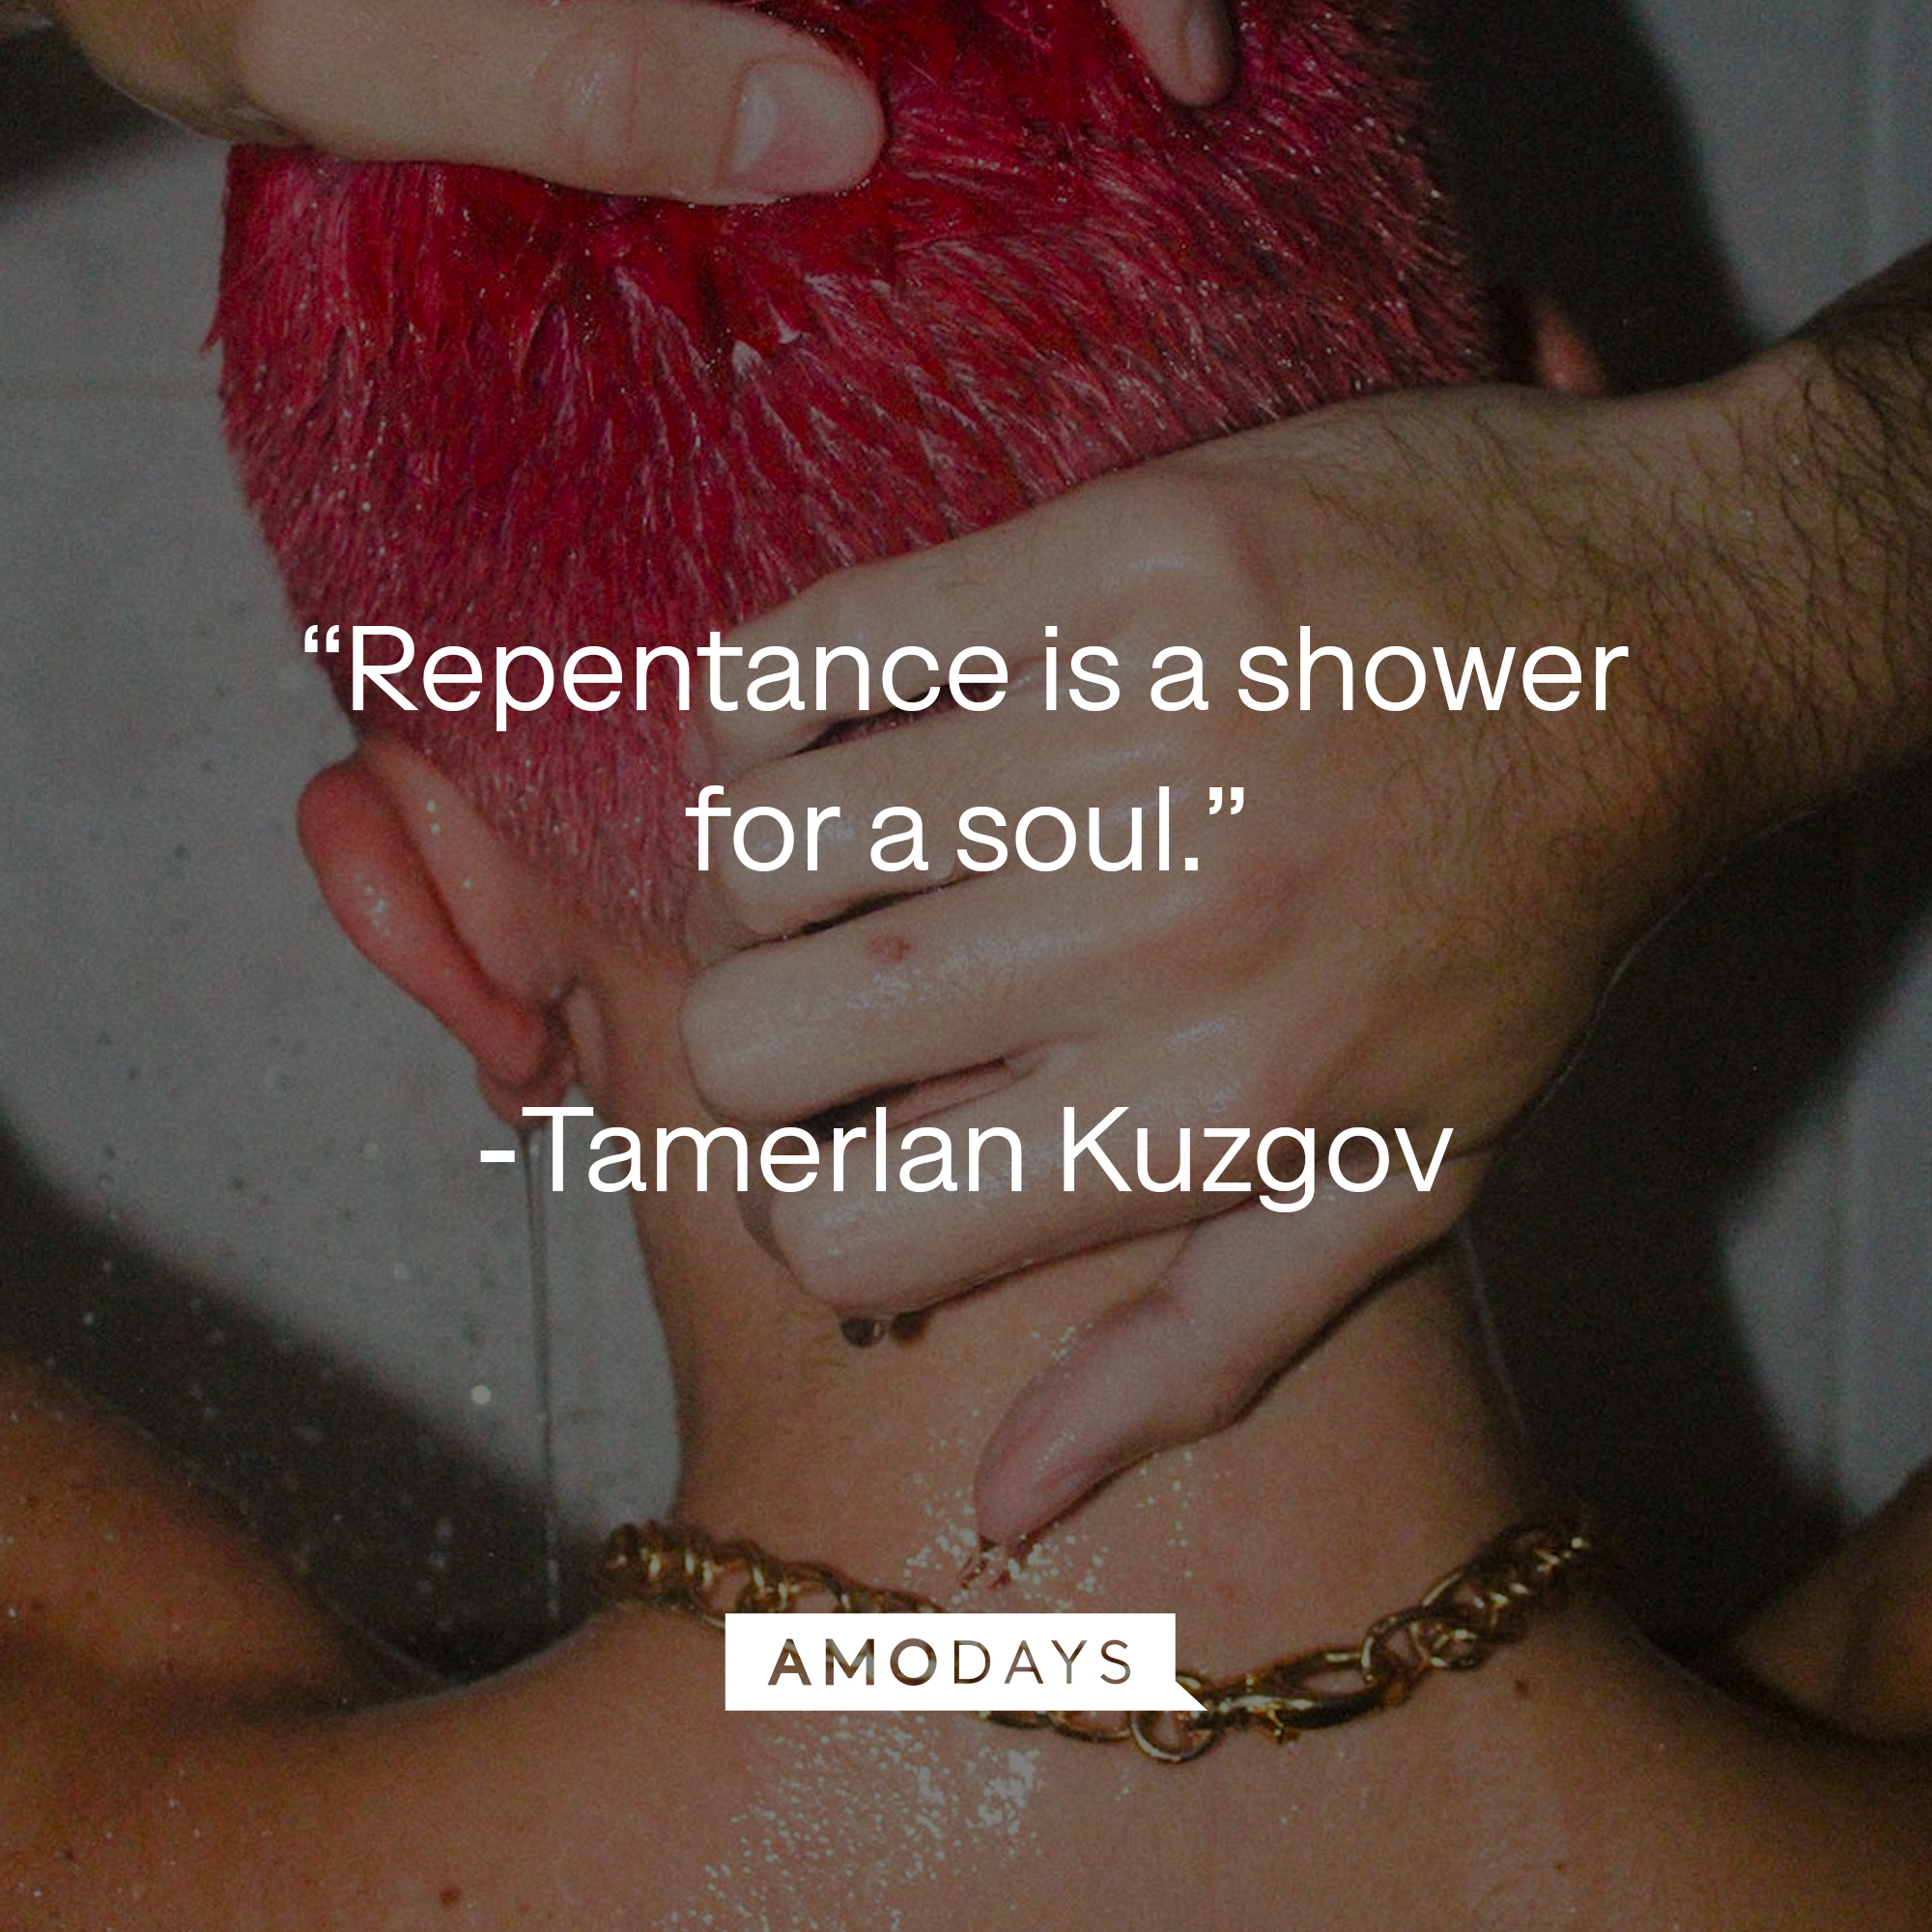 Tamerlan Kuzgov's quote: "Repentance is a shower for a soul." | Source: Goodreads